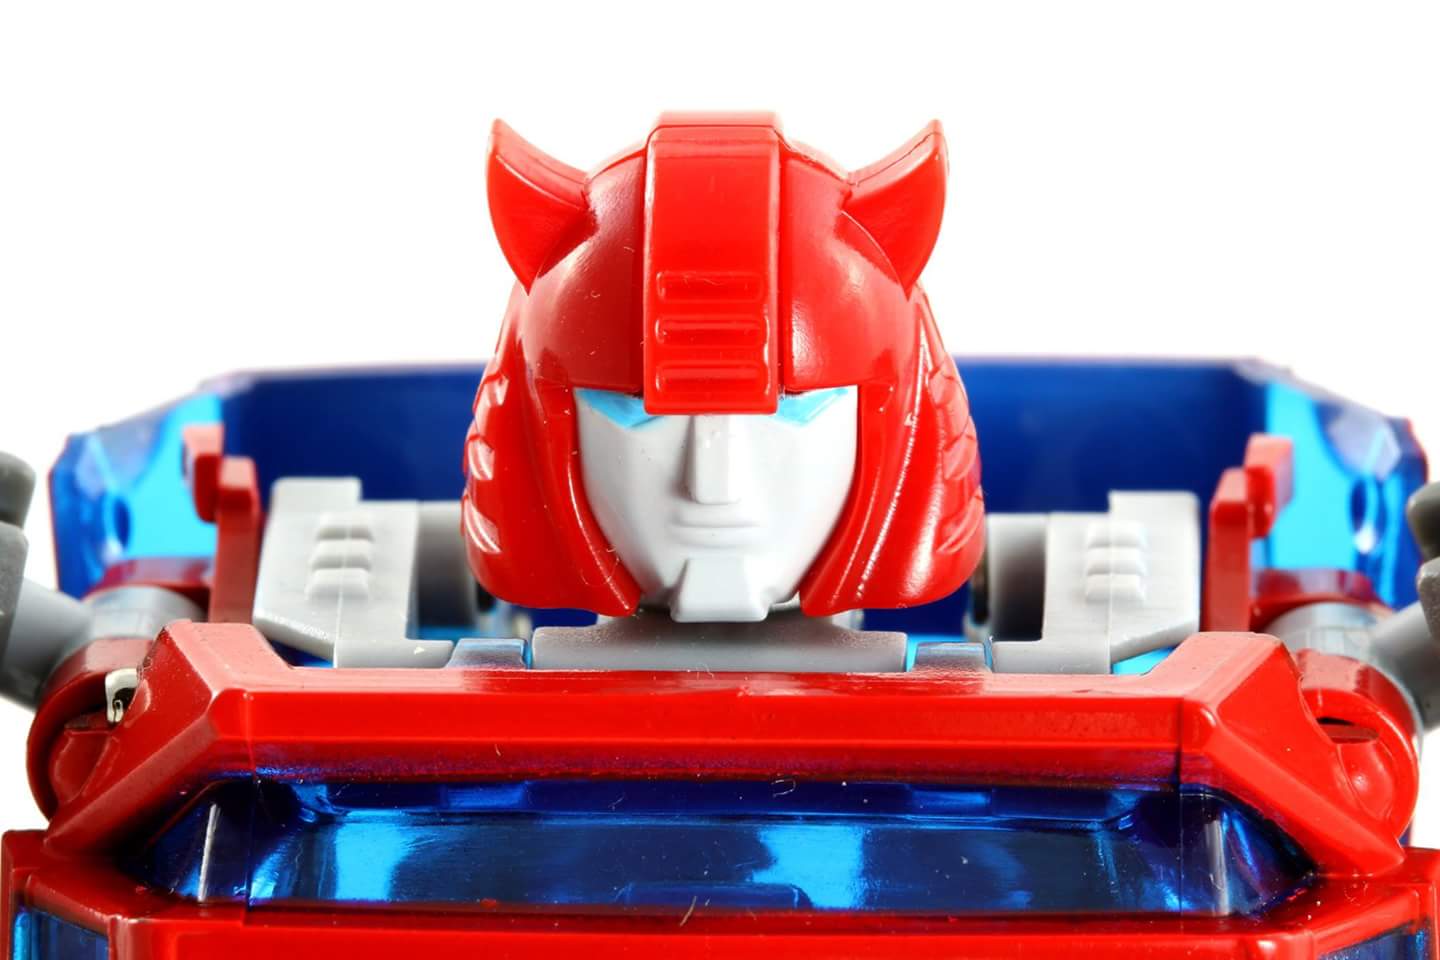 [ACE Collectables] Produit Tiers - Minibots MP - ACE-01 Tumbler (aka Cliffjumper/Matamore), ACE-02 Hiccups (aka Hubcap/Virevolto), ACE-03 Trident (aka Seaspray/Embruns) 97pHKvub